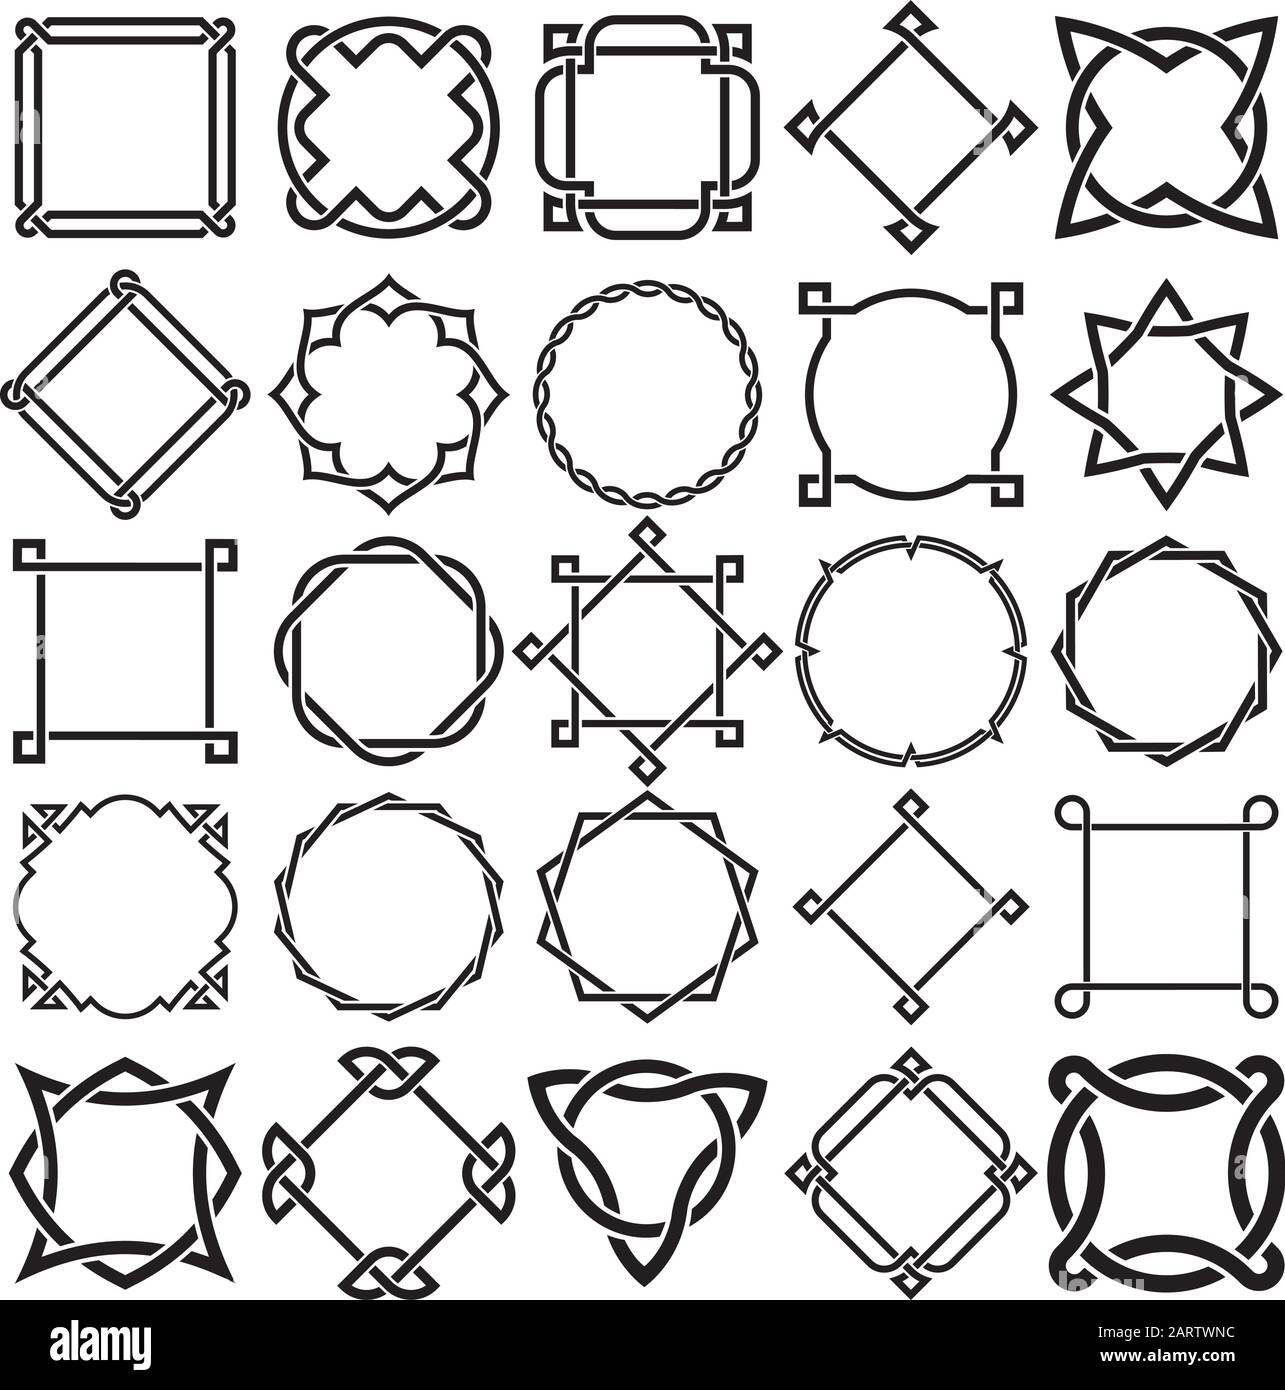 Collection of Knotwork Decorative Ornamental Border Frames. Ideal for label designs. Stock Vector